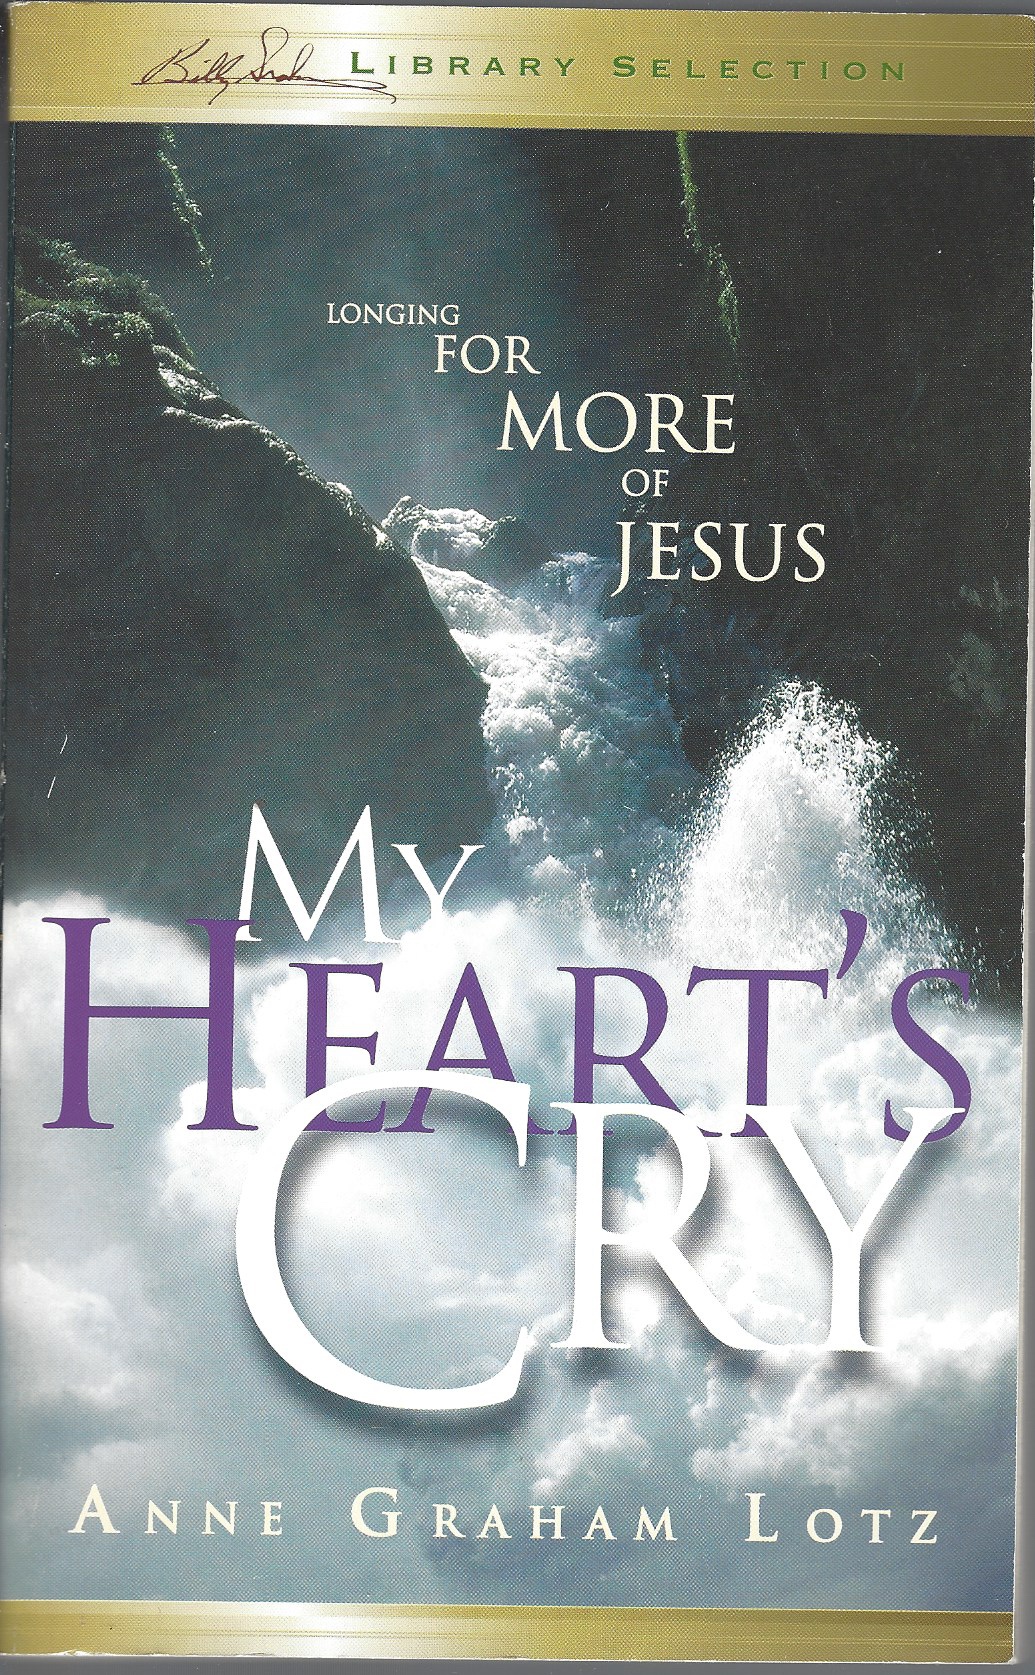 LOTZ ANNE GRAHAM - My Heart's Cry Longing for More of Jesus